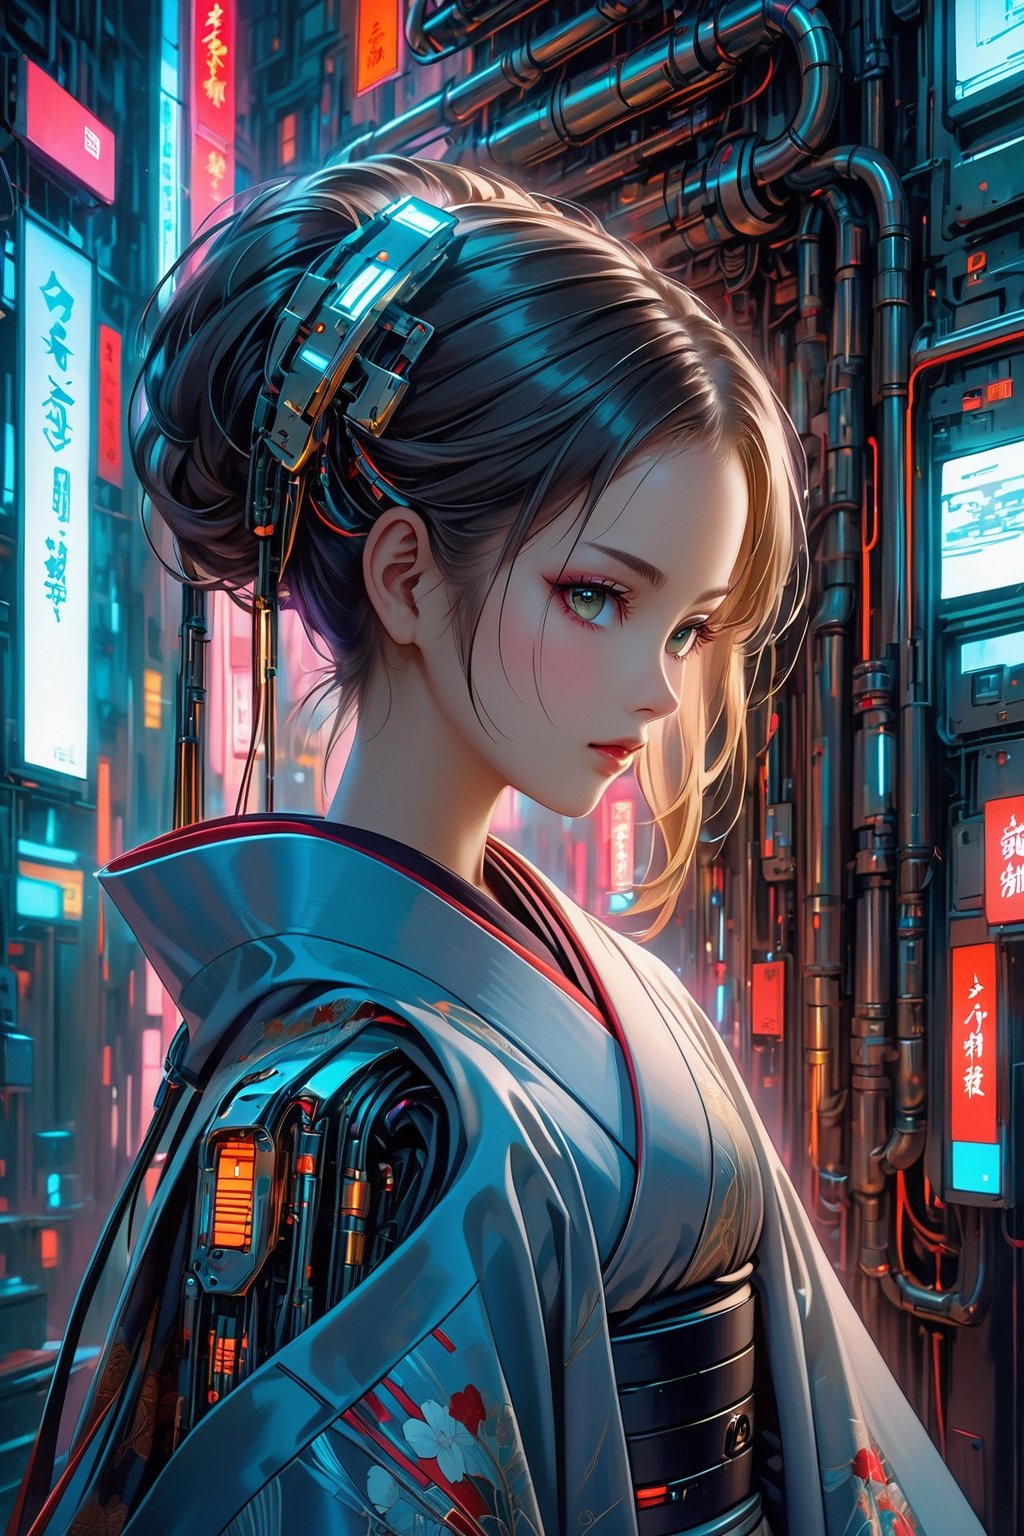 In a cyberpunk fusion with traditional Japanese culture, a young Japanese girl dons a sleek kimono contrasted by a futuristic mechanical arm and intricate piping. The image, likely a digital painting, showcases a blend of old and new elements with a unique twist. The vibrant scene exudes a sense of technological elegance, with neon lights illuminating the girl's stoic expression and the intricate details of her cybernetic enhancements. The high-resolution image captures every intricate detail, from the delicate embroidery on the kimono to the seamless integration of the mechanical arm into the girl's silhouette, creating a visually stunning and thought piece of art.